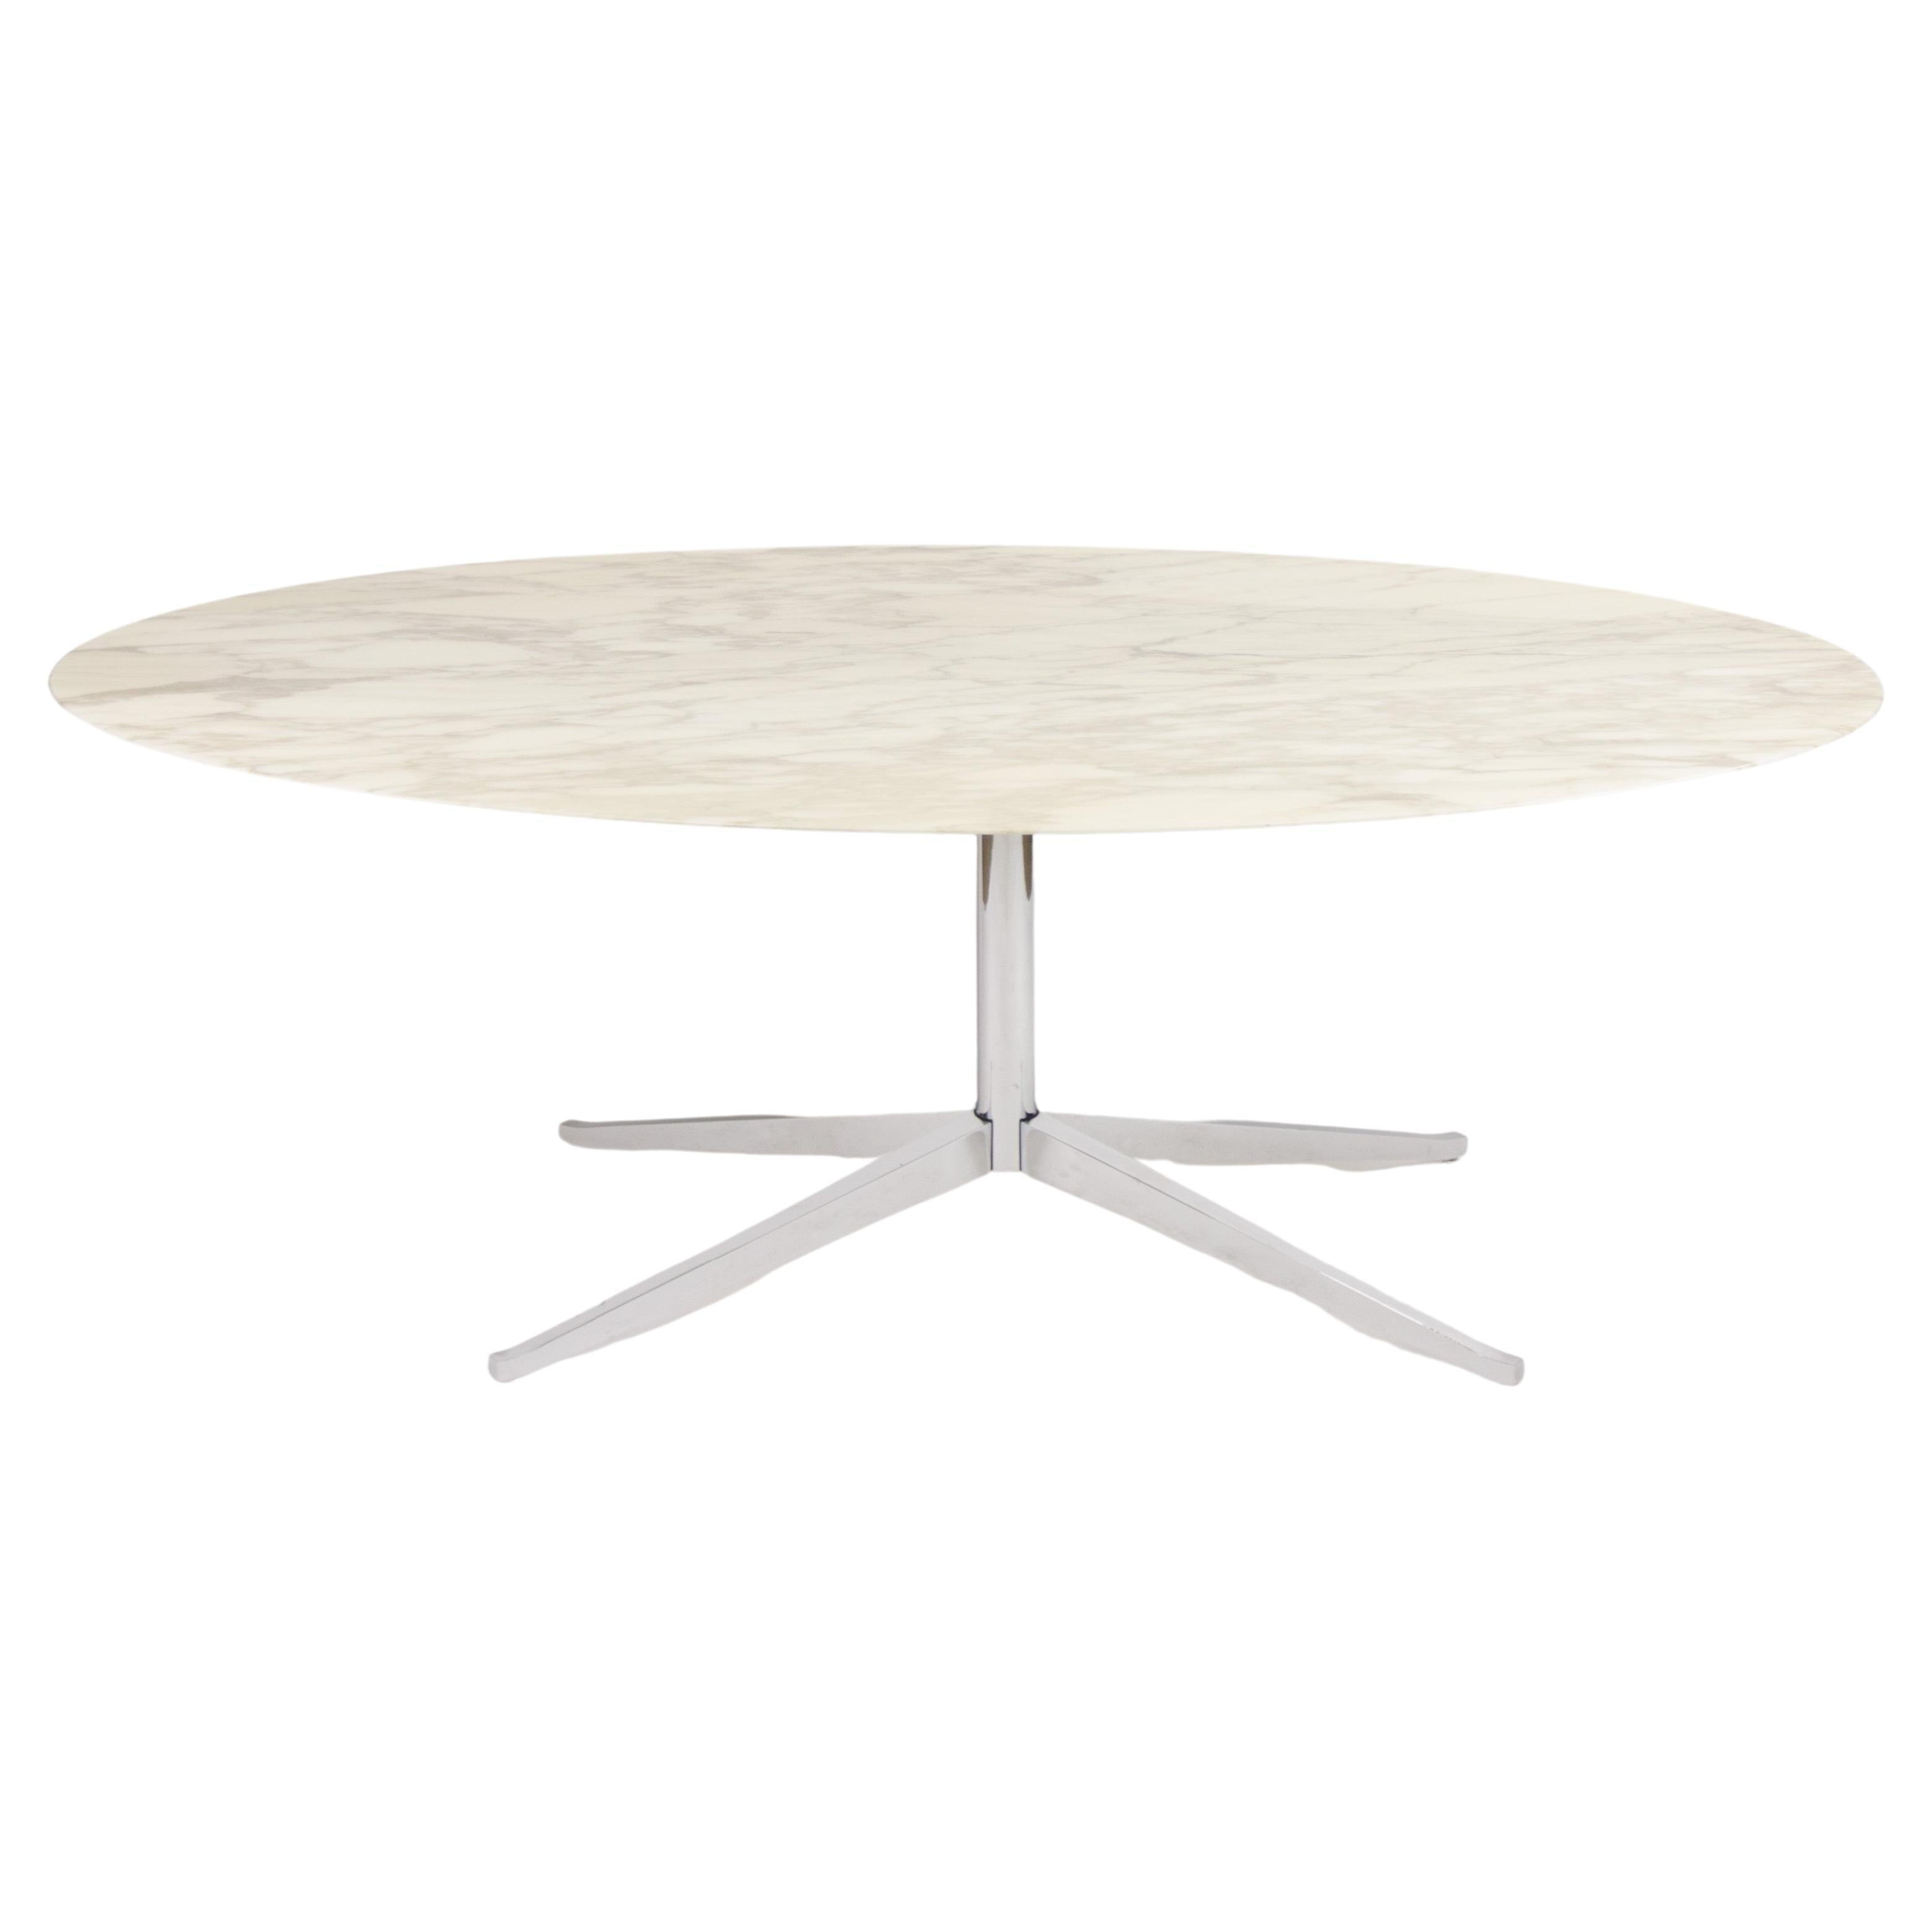 2007 Florence Knoll 78 in Calacatta Marble Dining Conference Table 2x Available For Sale